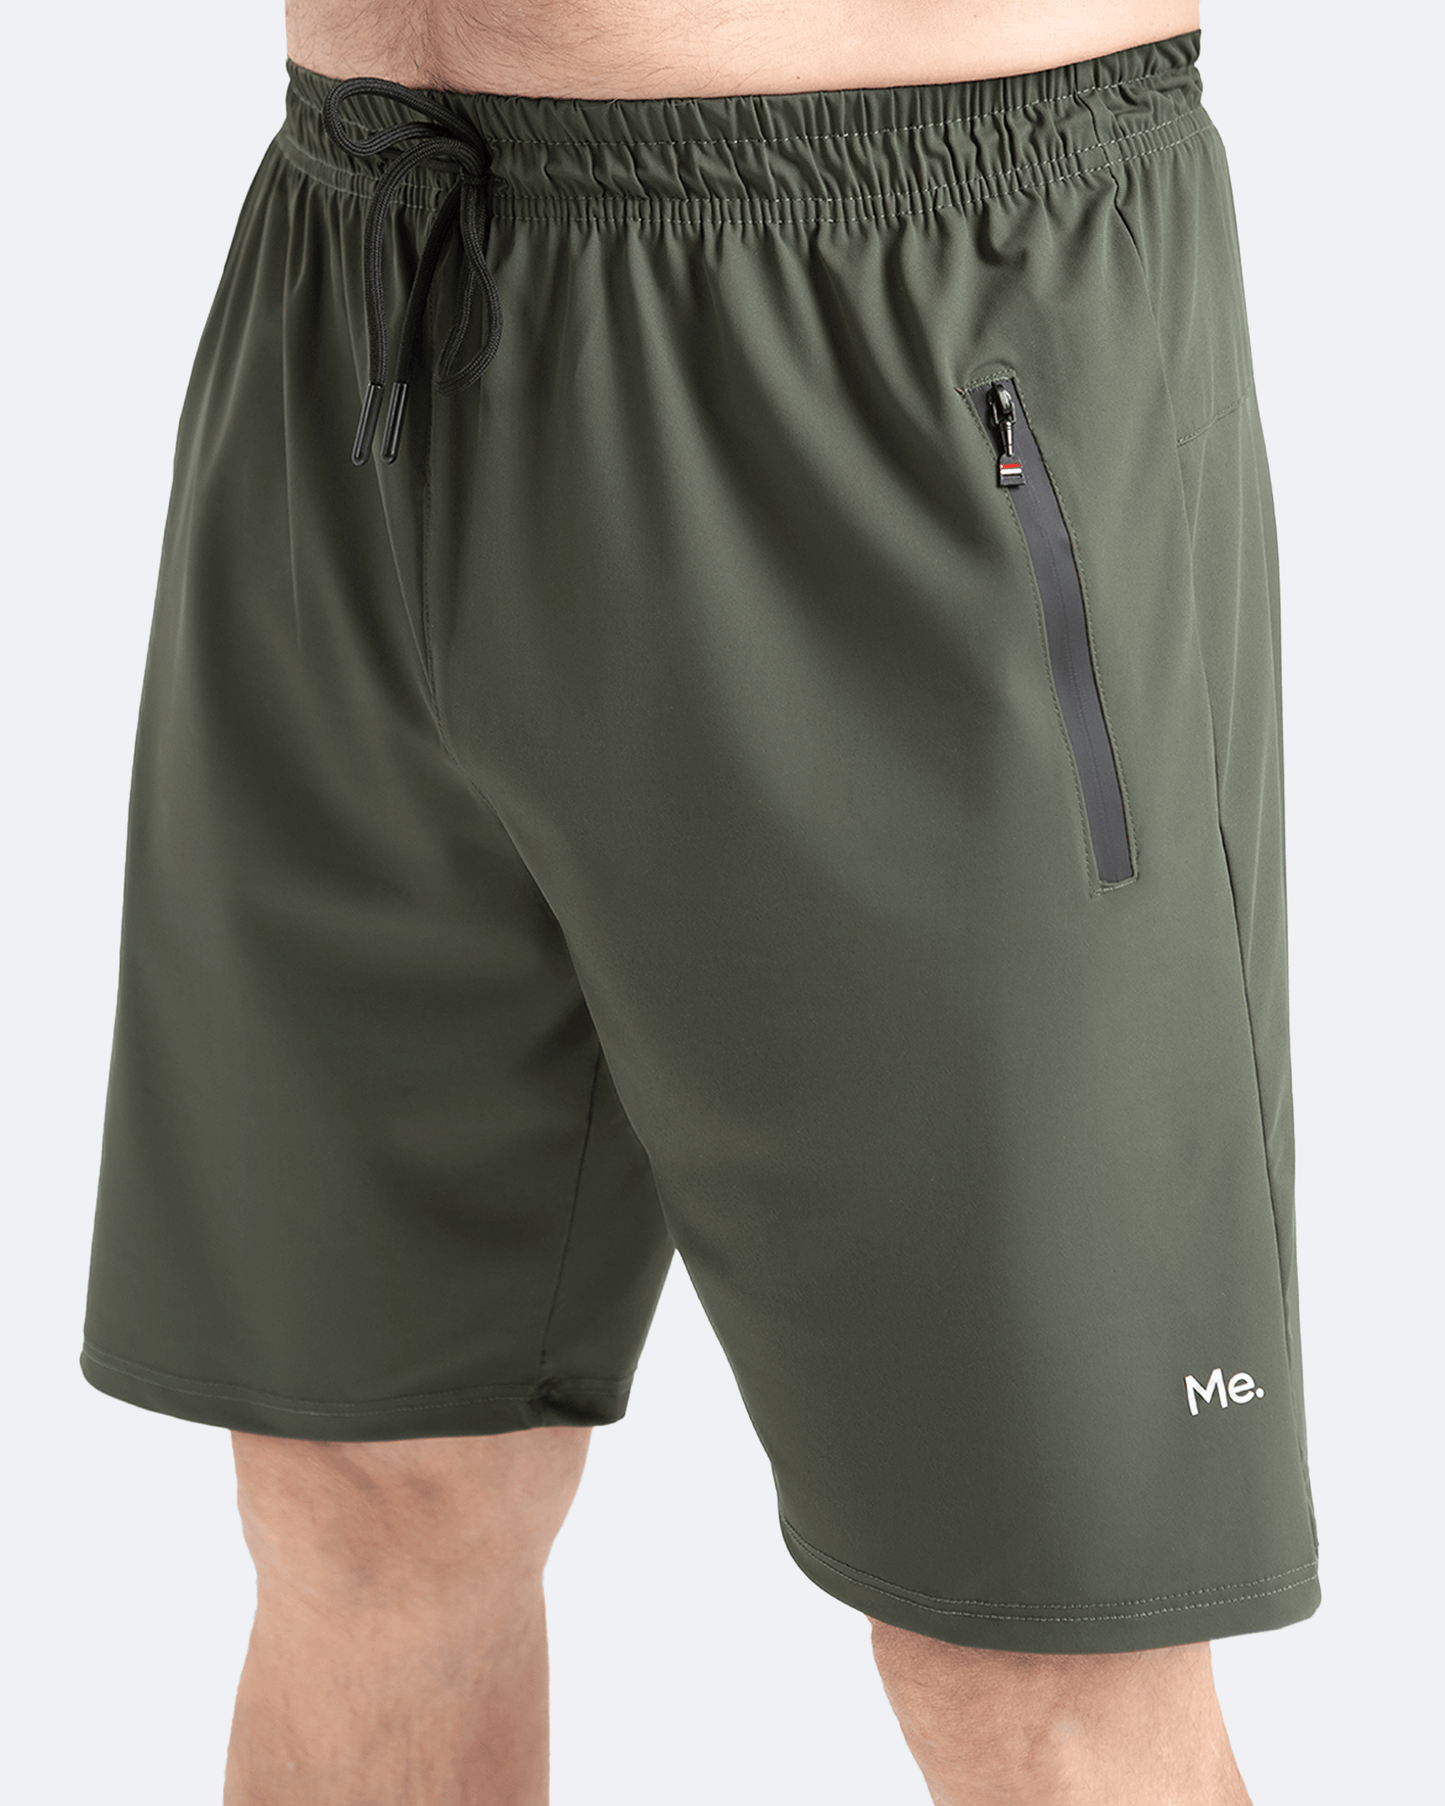 Gym Shorts | Creating Power Within